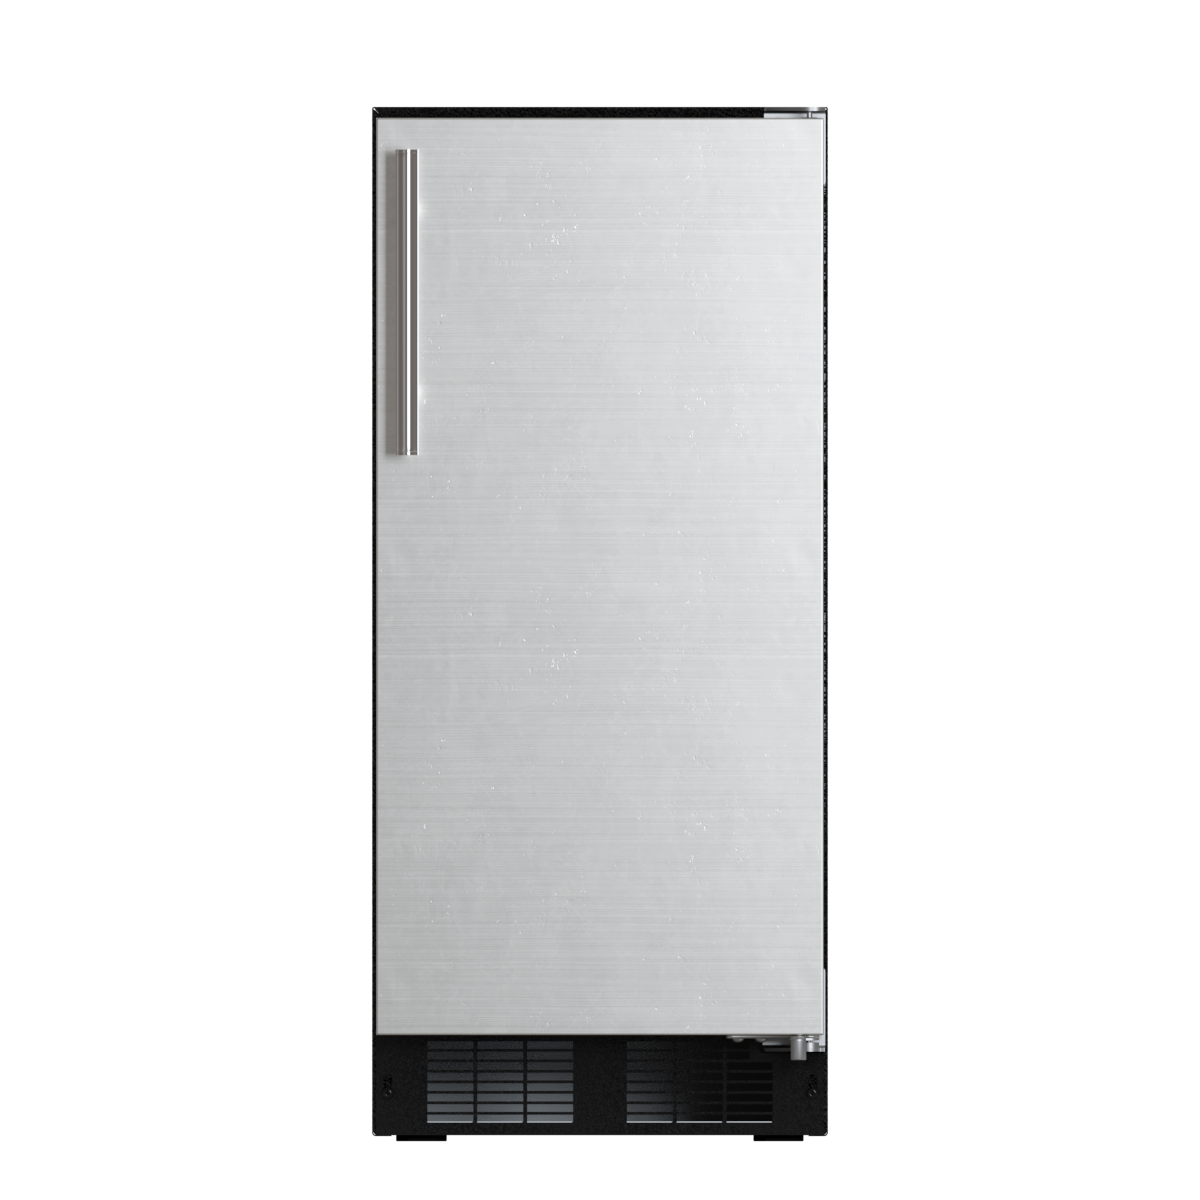 Northland 15 inch 2.7 cu. ft. Undercounter Refrigeration, NL15RAS0RS